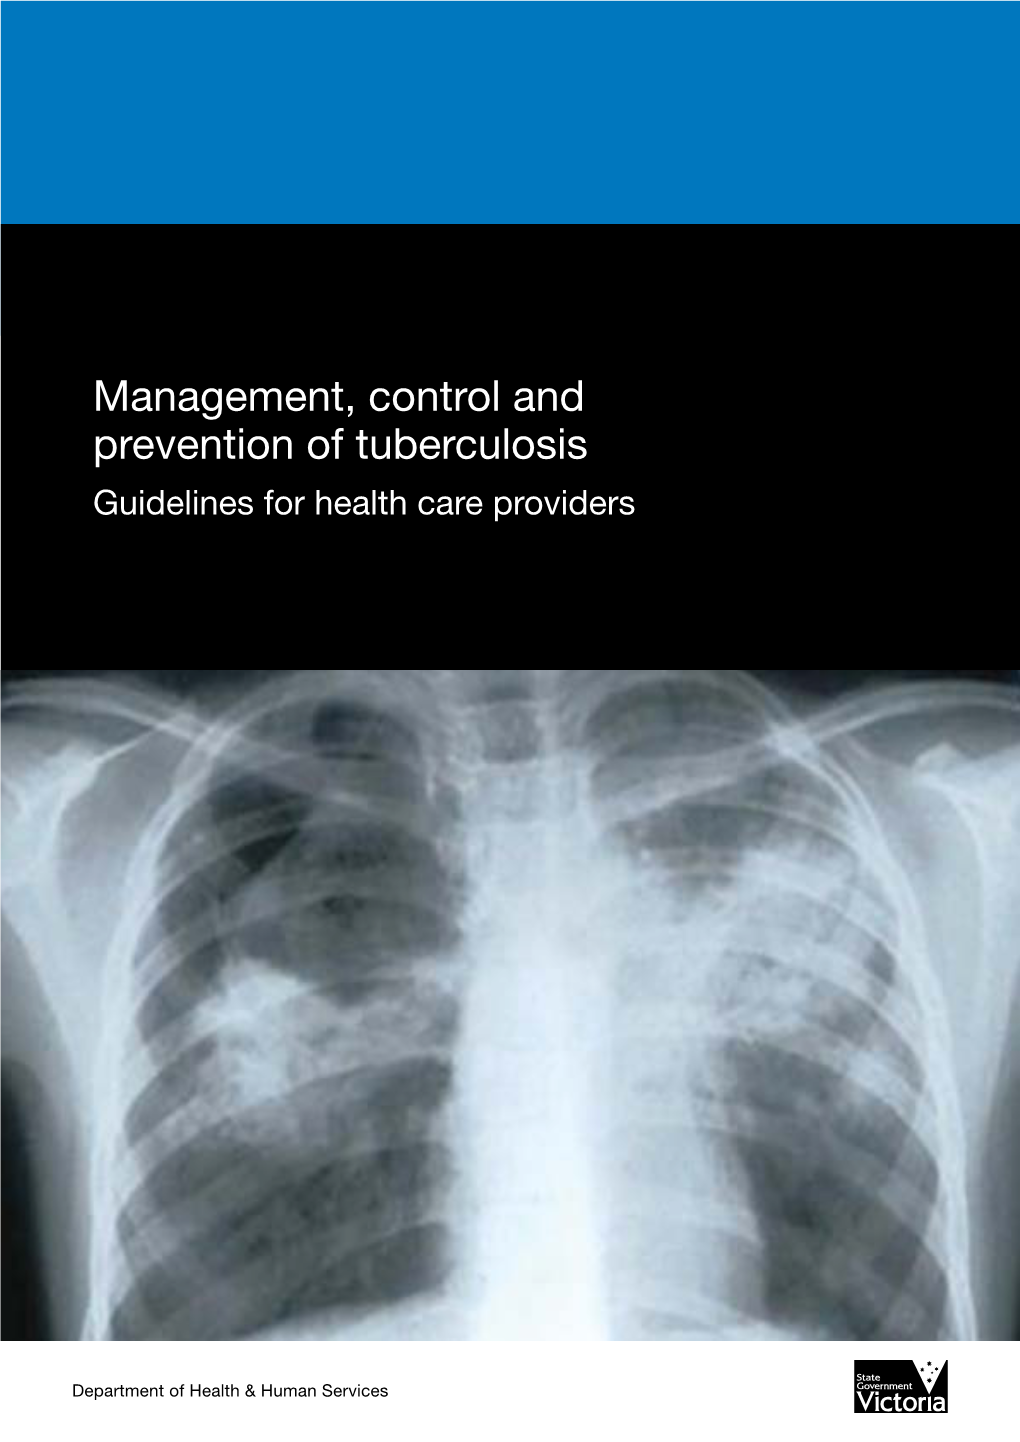 Management, Control and Prevention of Tuberculosis Guidelines for Health Care Providers